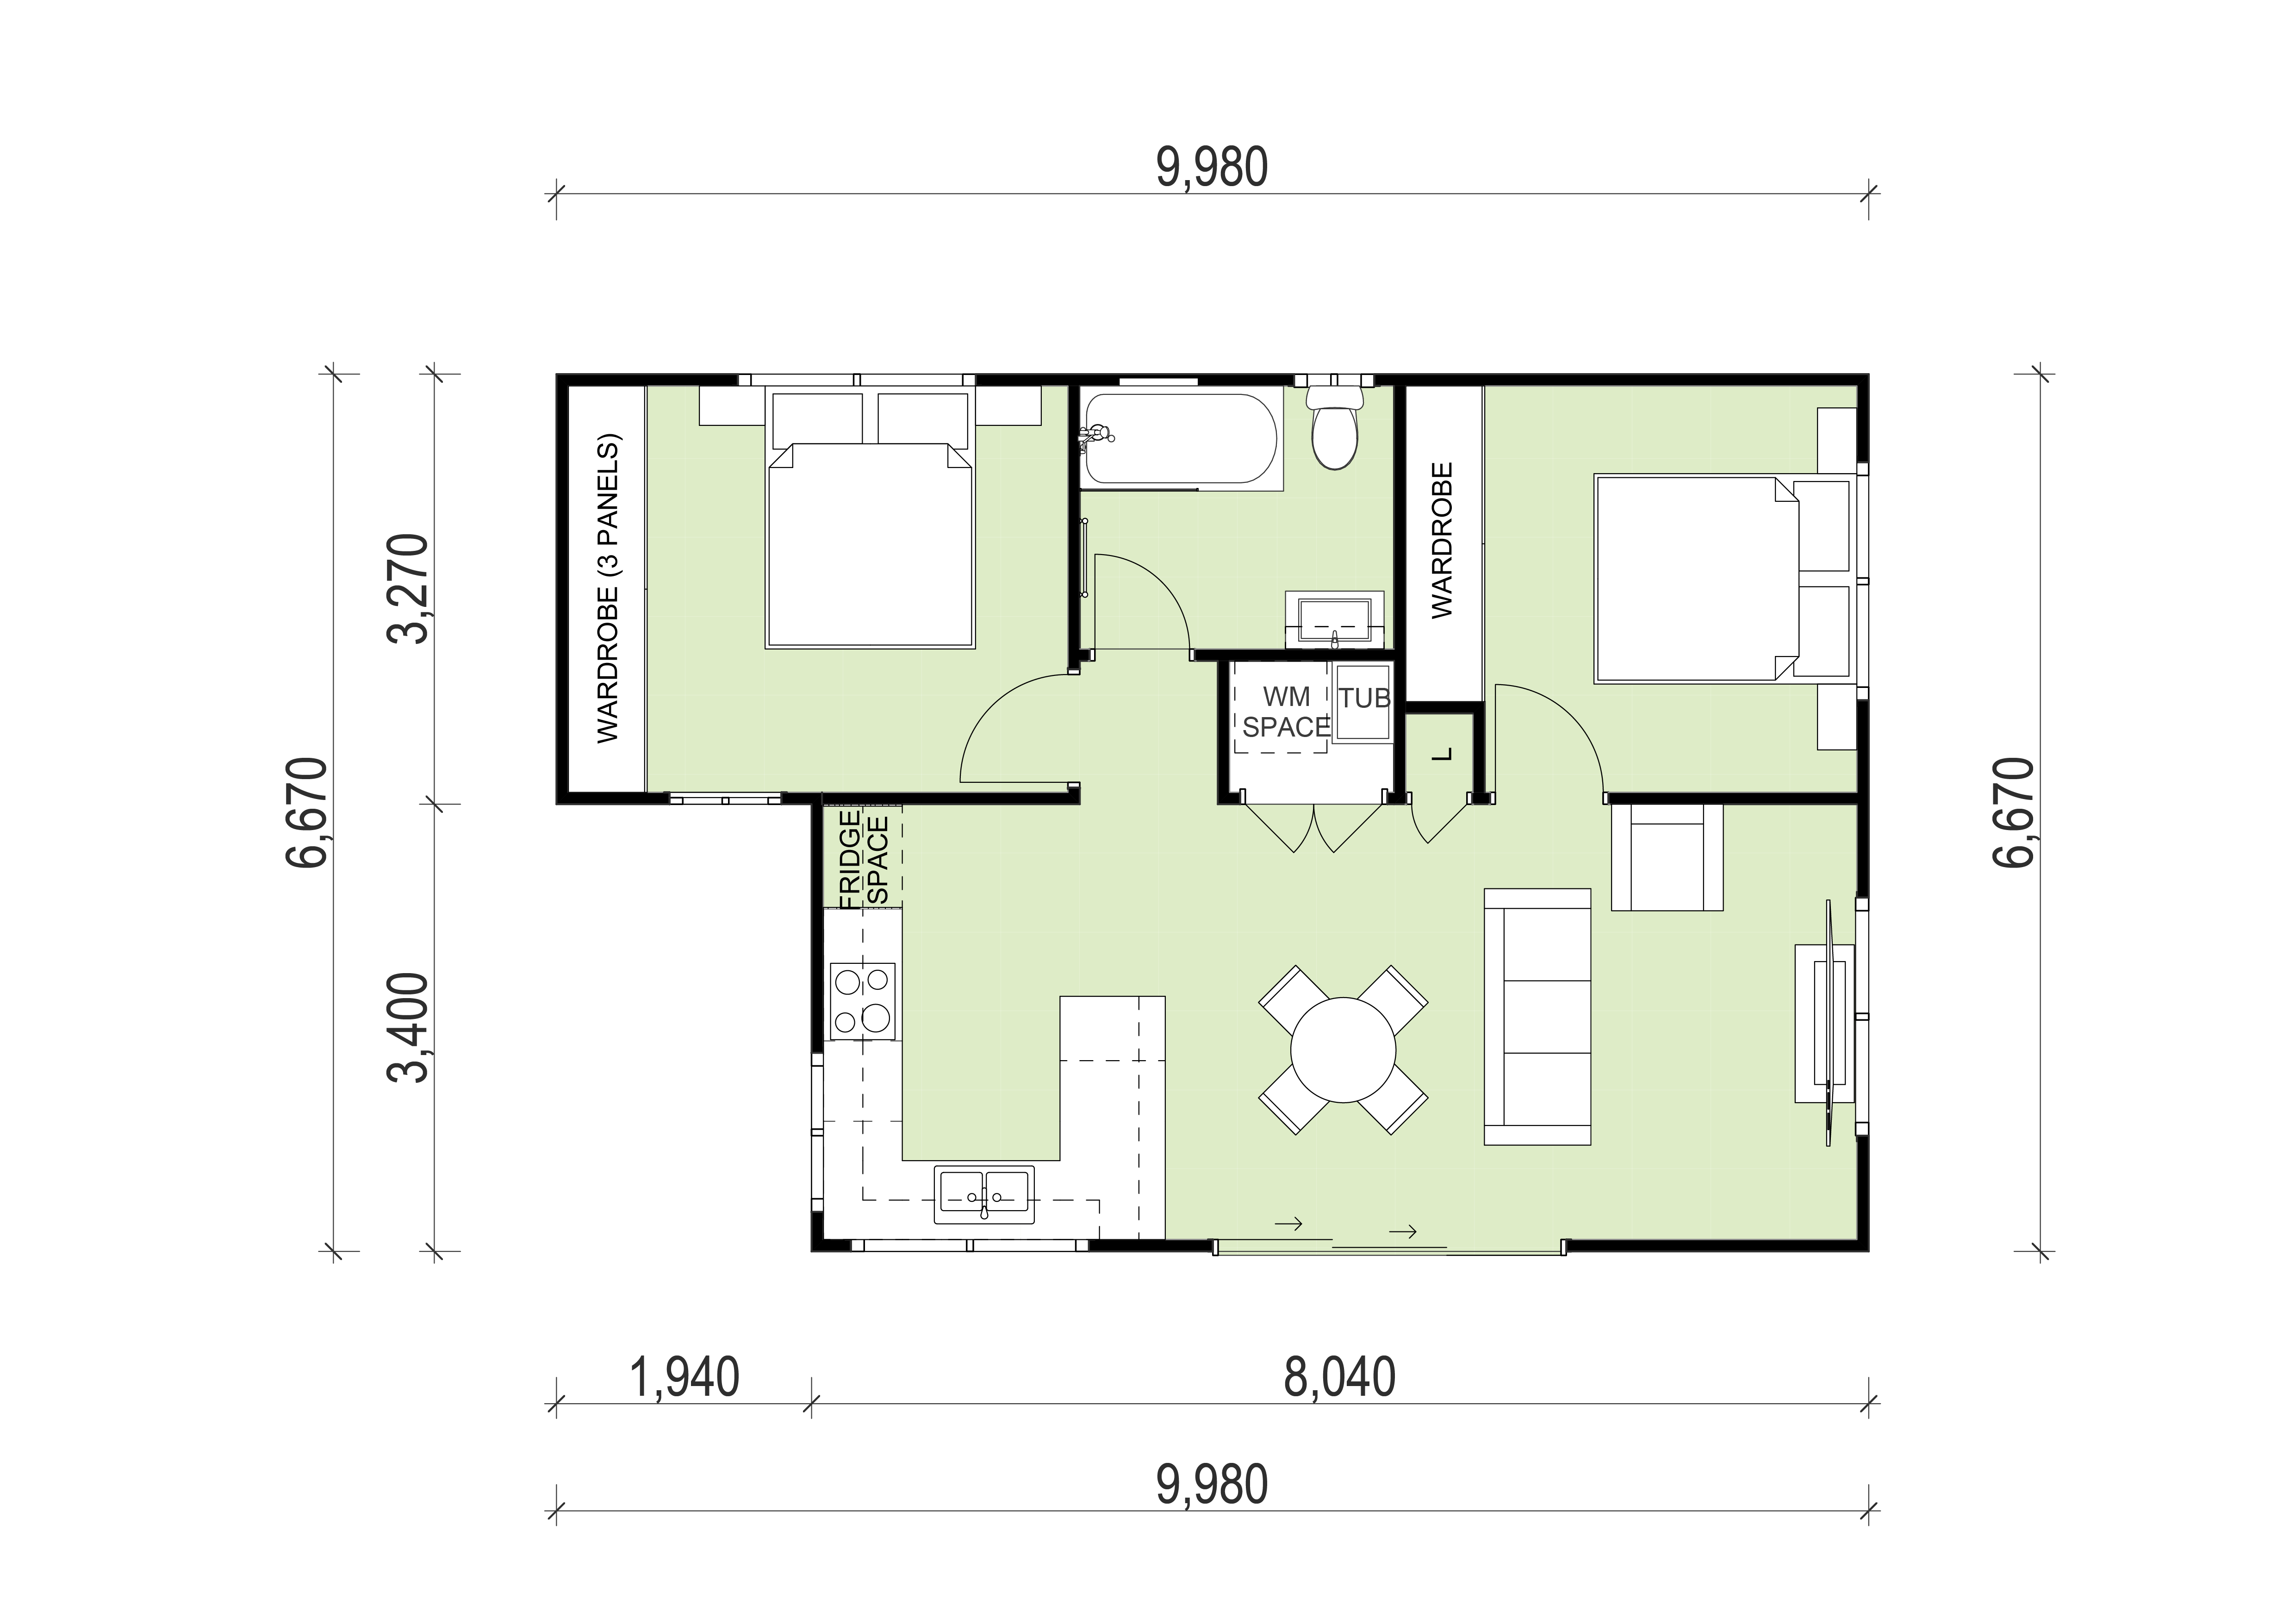 Granny flat with 2 bedrooms 1 bathroom